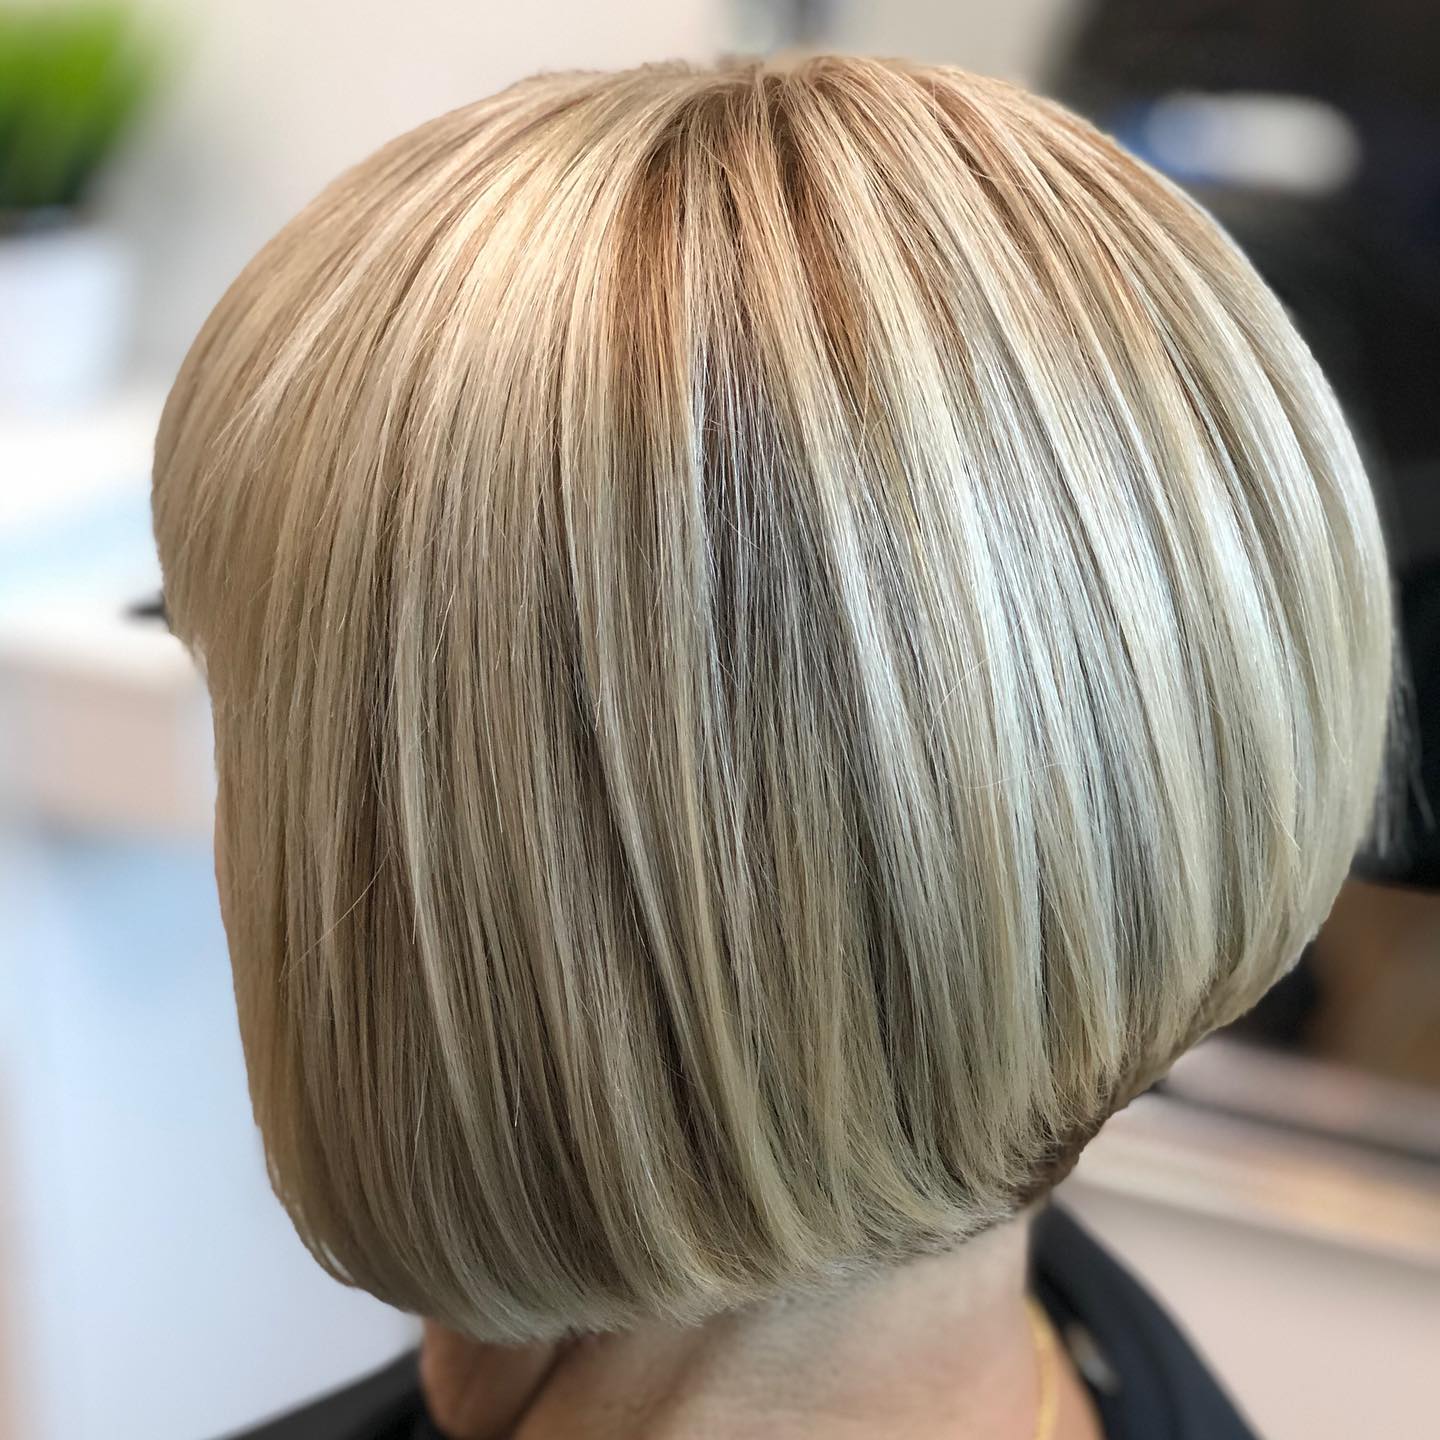 Stacked Bob 50 Long stacked bob | Medium length stacked bob | Pictures of stacked bob haircuts front and back Stacked Bob Hairstyles for Women